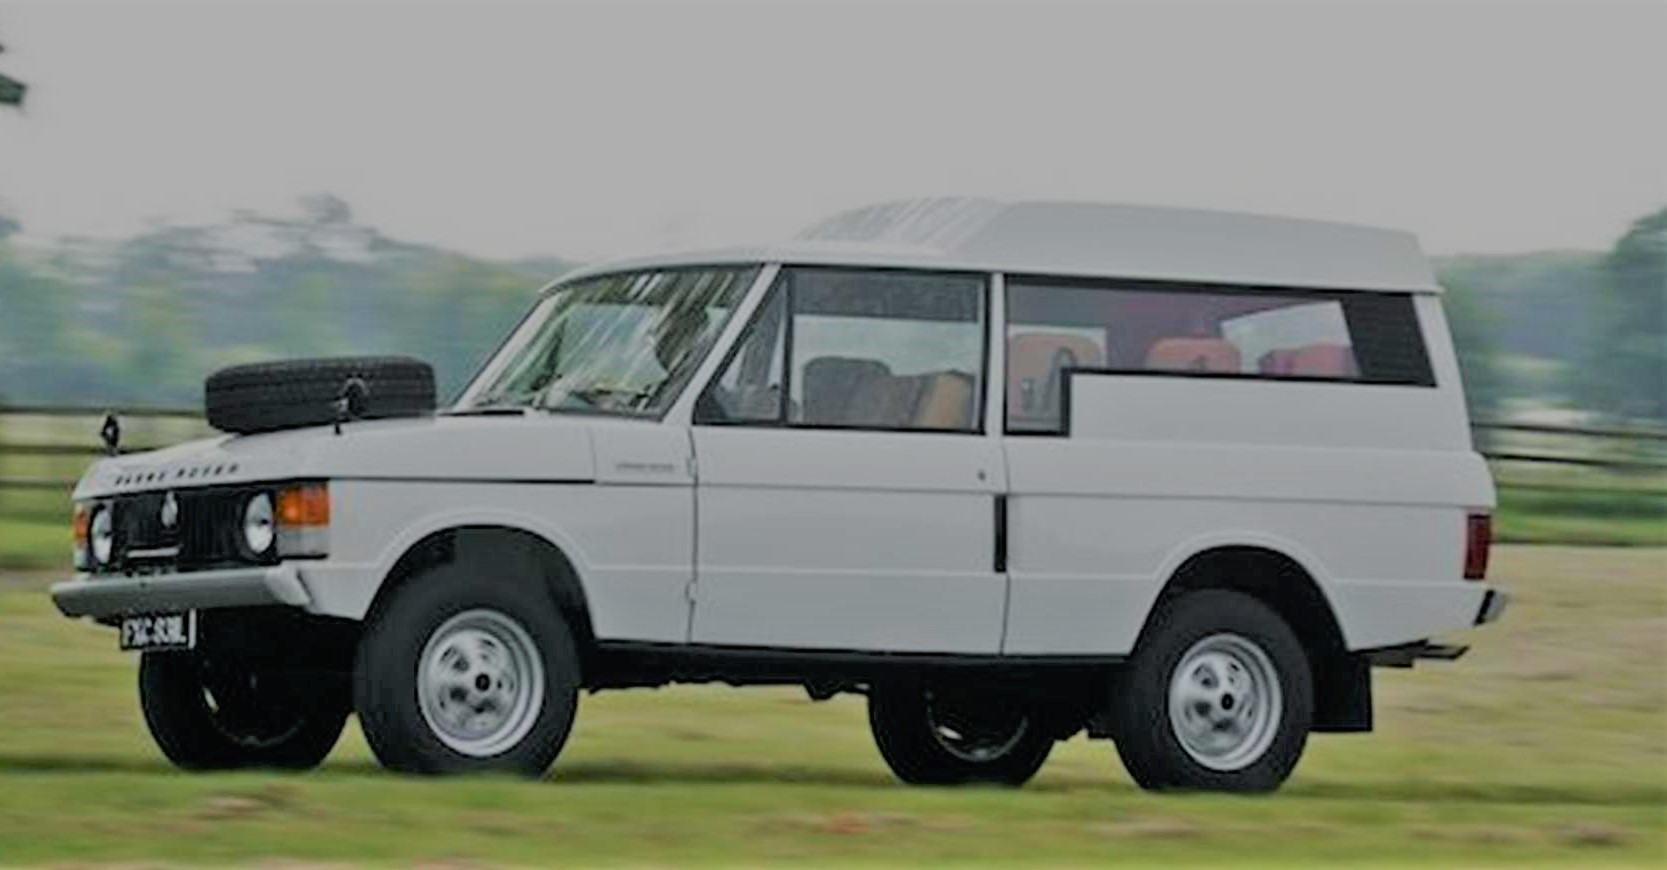 1972 Range Rover Shooting Brake is Rare and Expensive